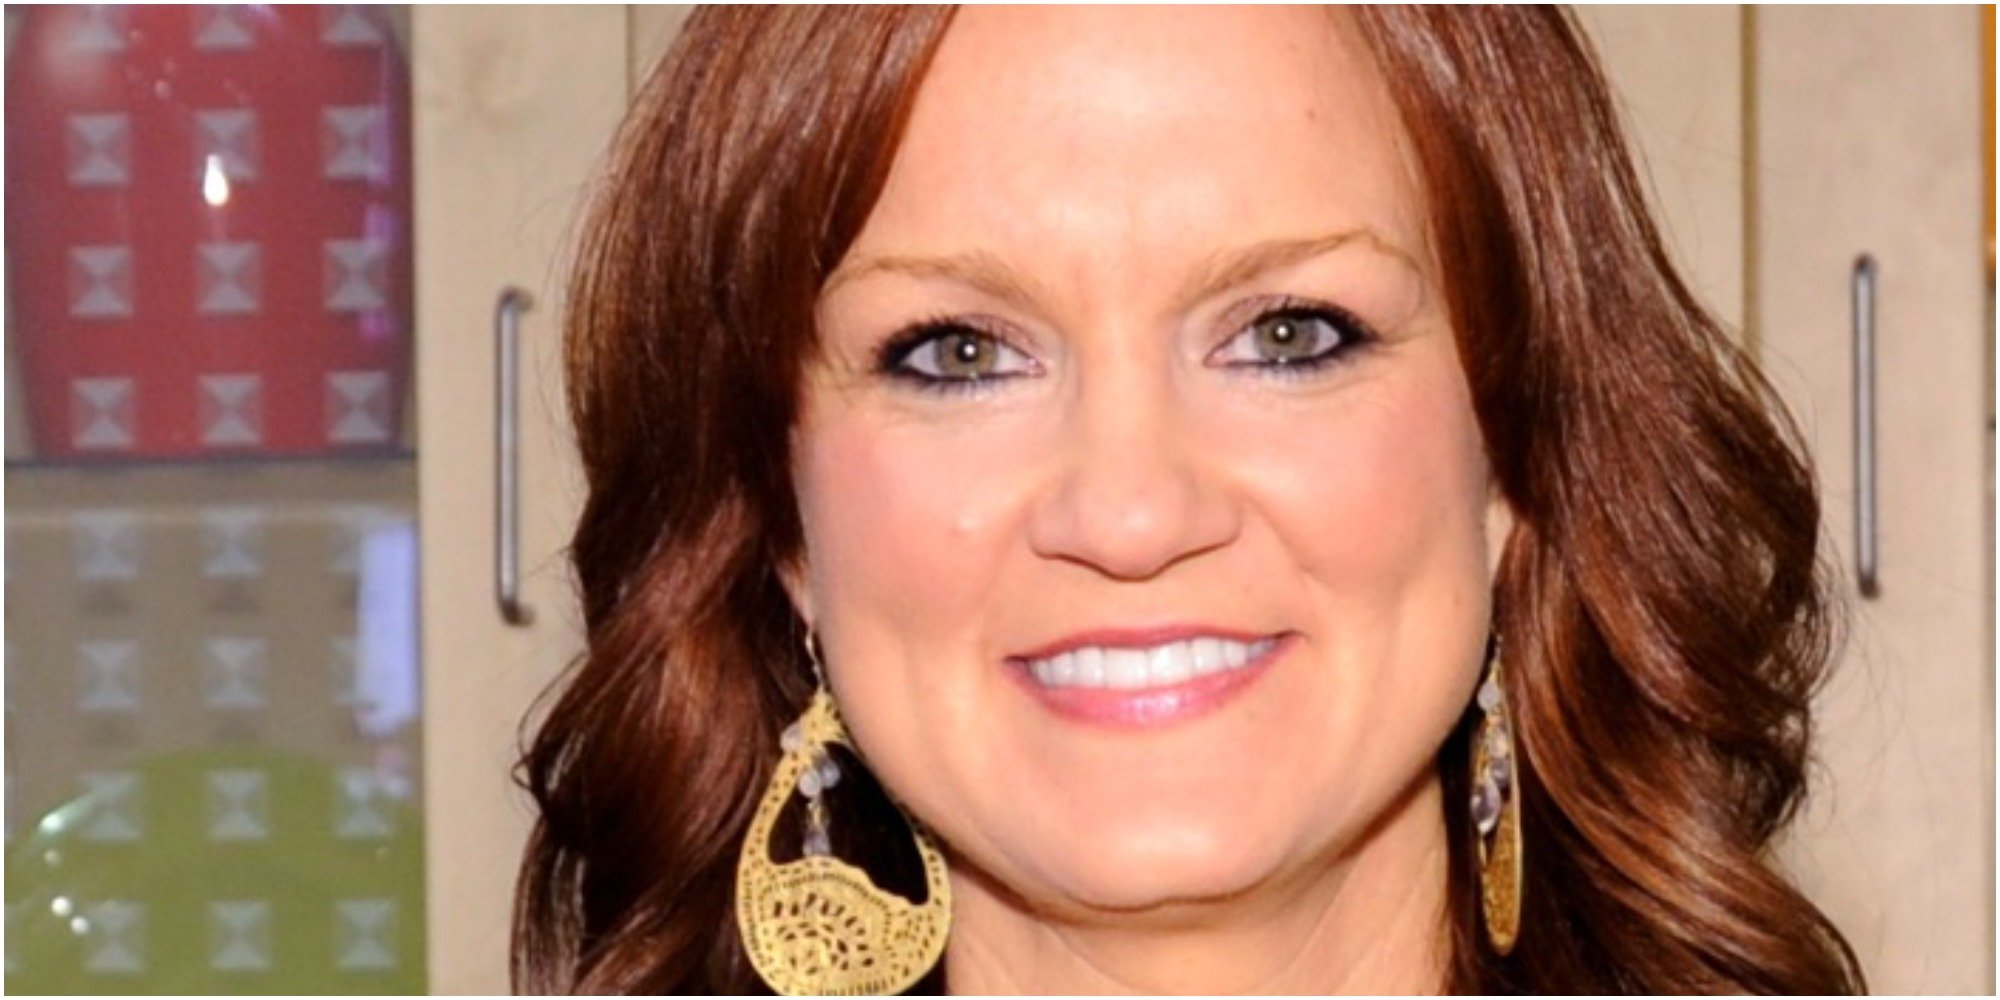 Ree Drummond poses on the set of Good Morning America.